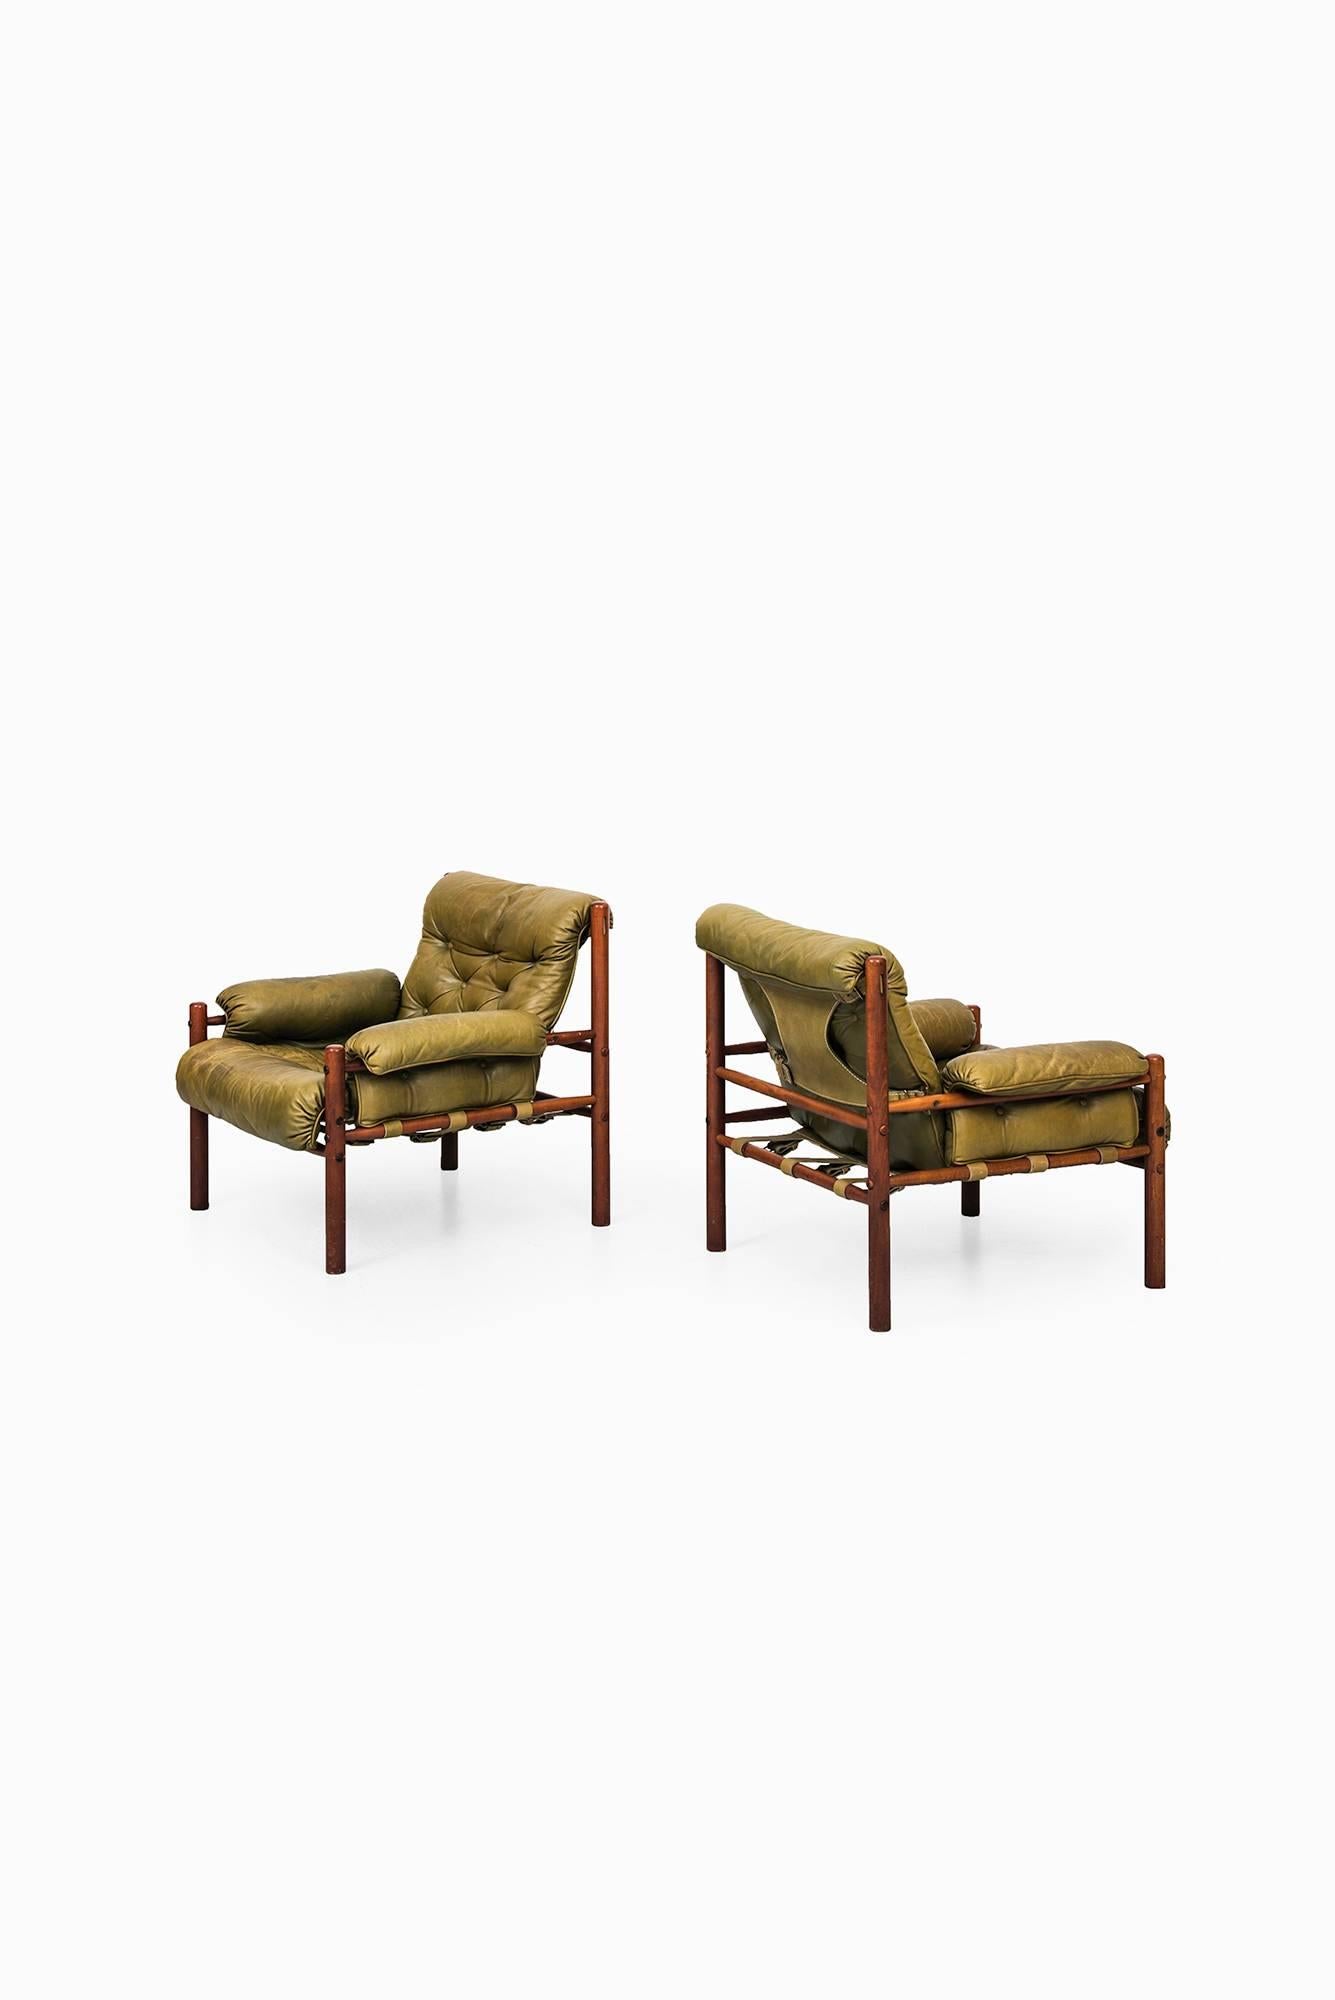 Mid-Century Modern Arne Norell Easy Chairs in Green Leather by Norell AB in Sweden